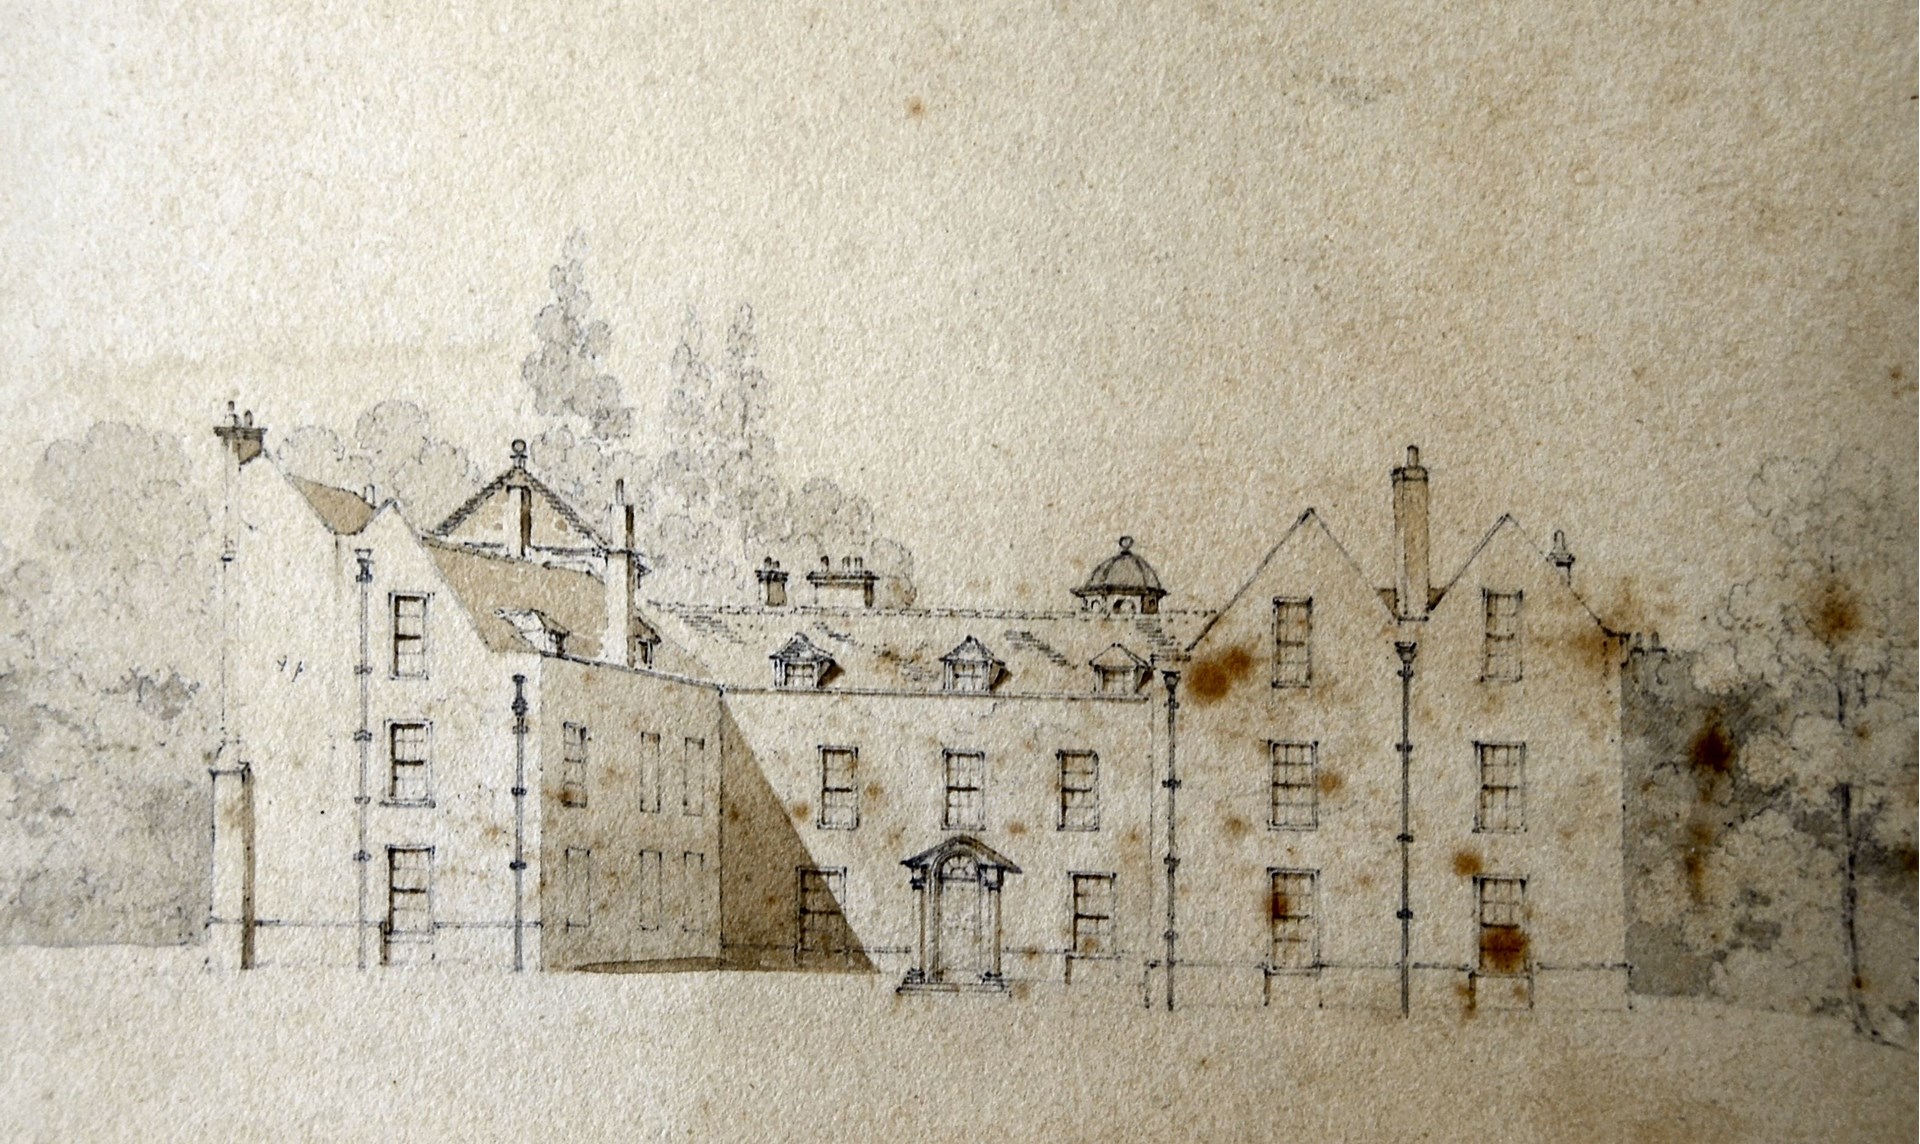 Warnford Park House (Belmont) from the North, September 1819